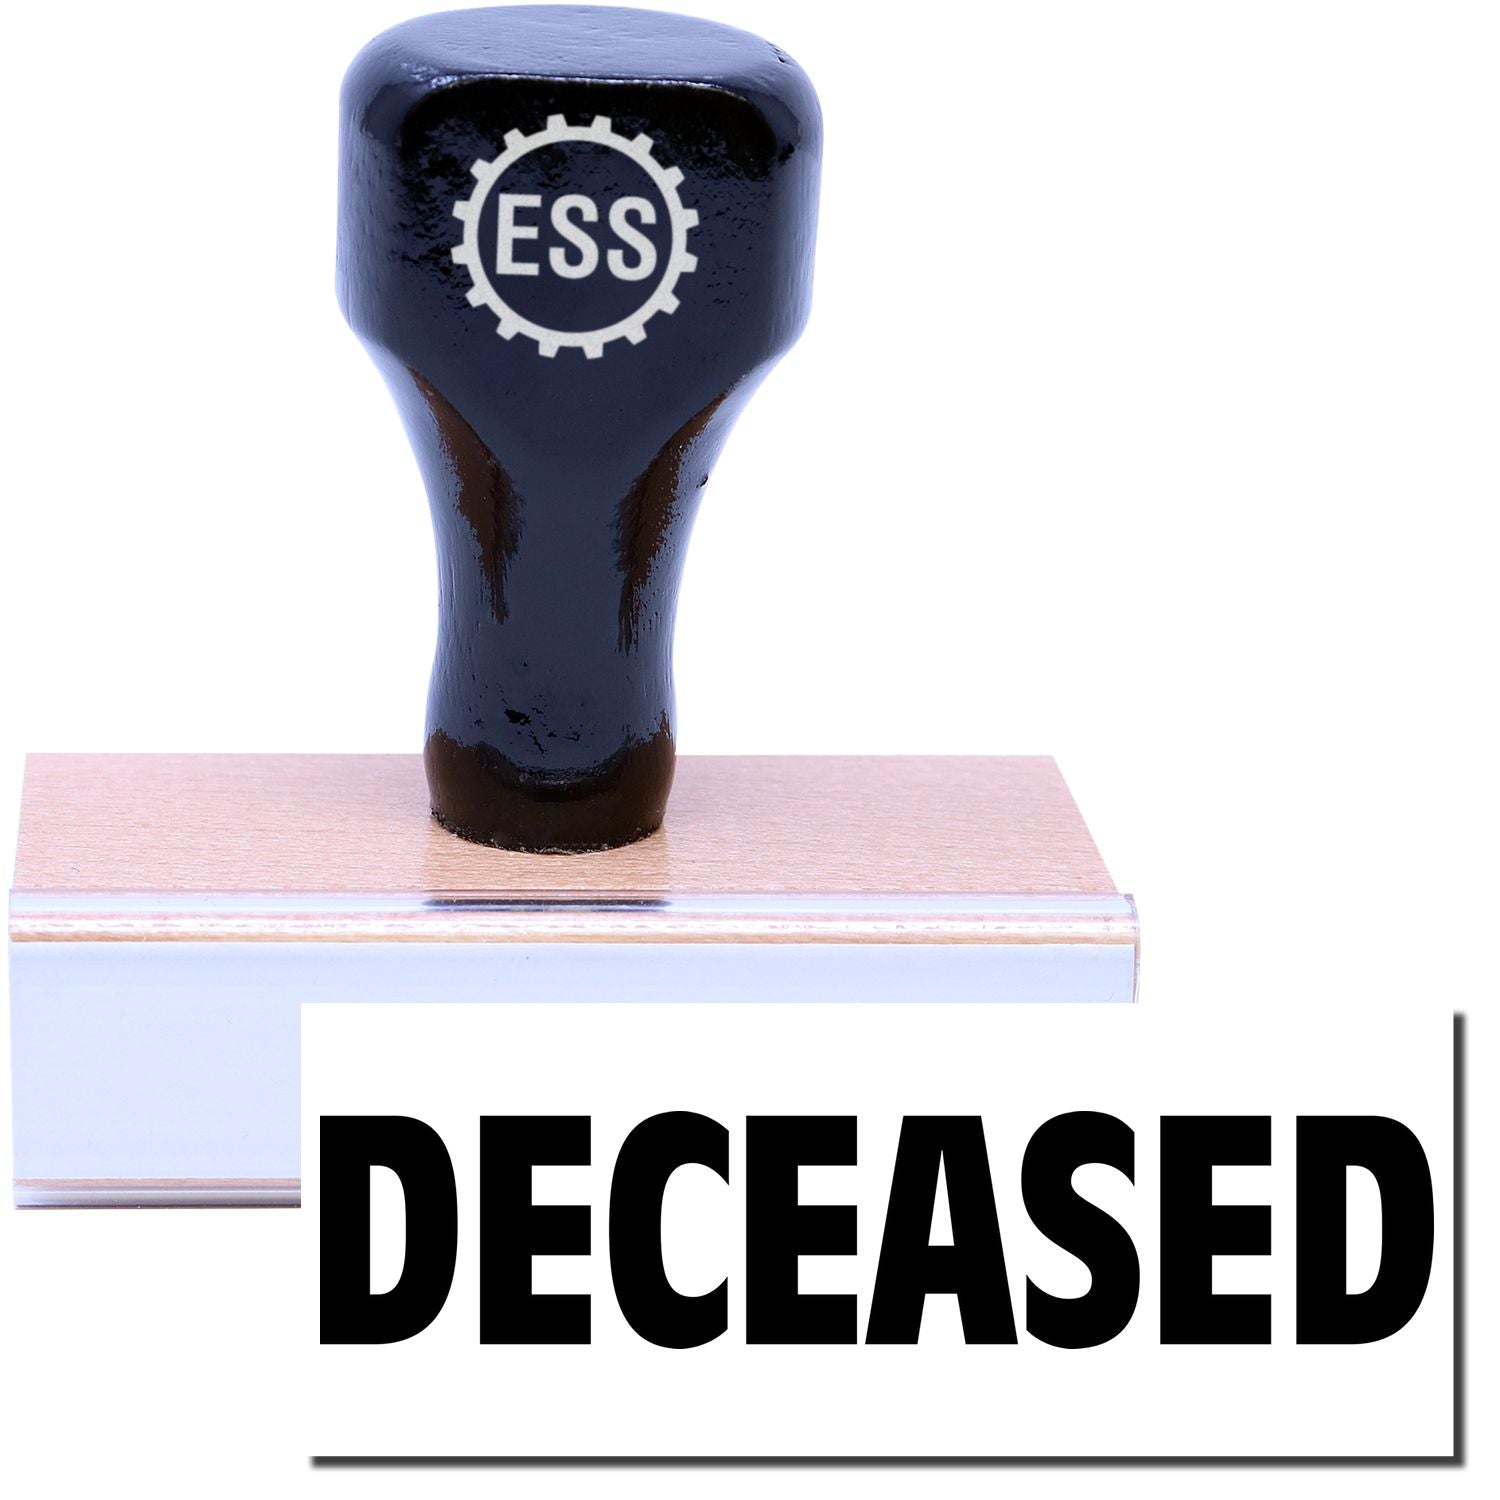 A stock office rubber stamp with a stamped image showing how the text "DECEASED" is displayed after stamping.